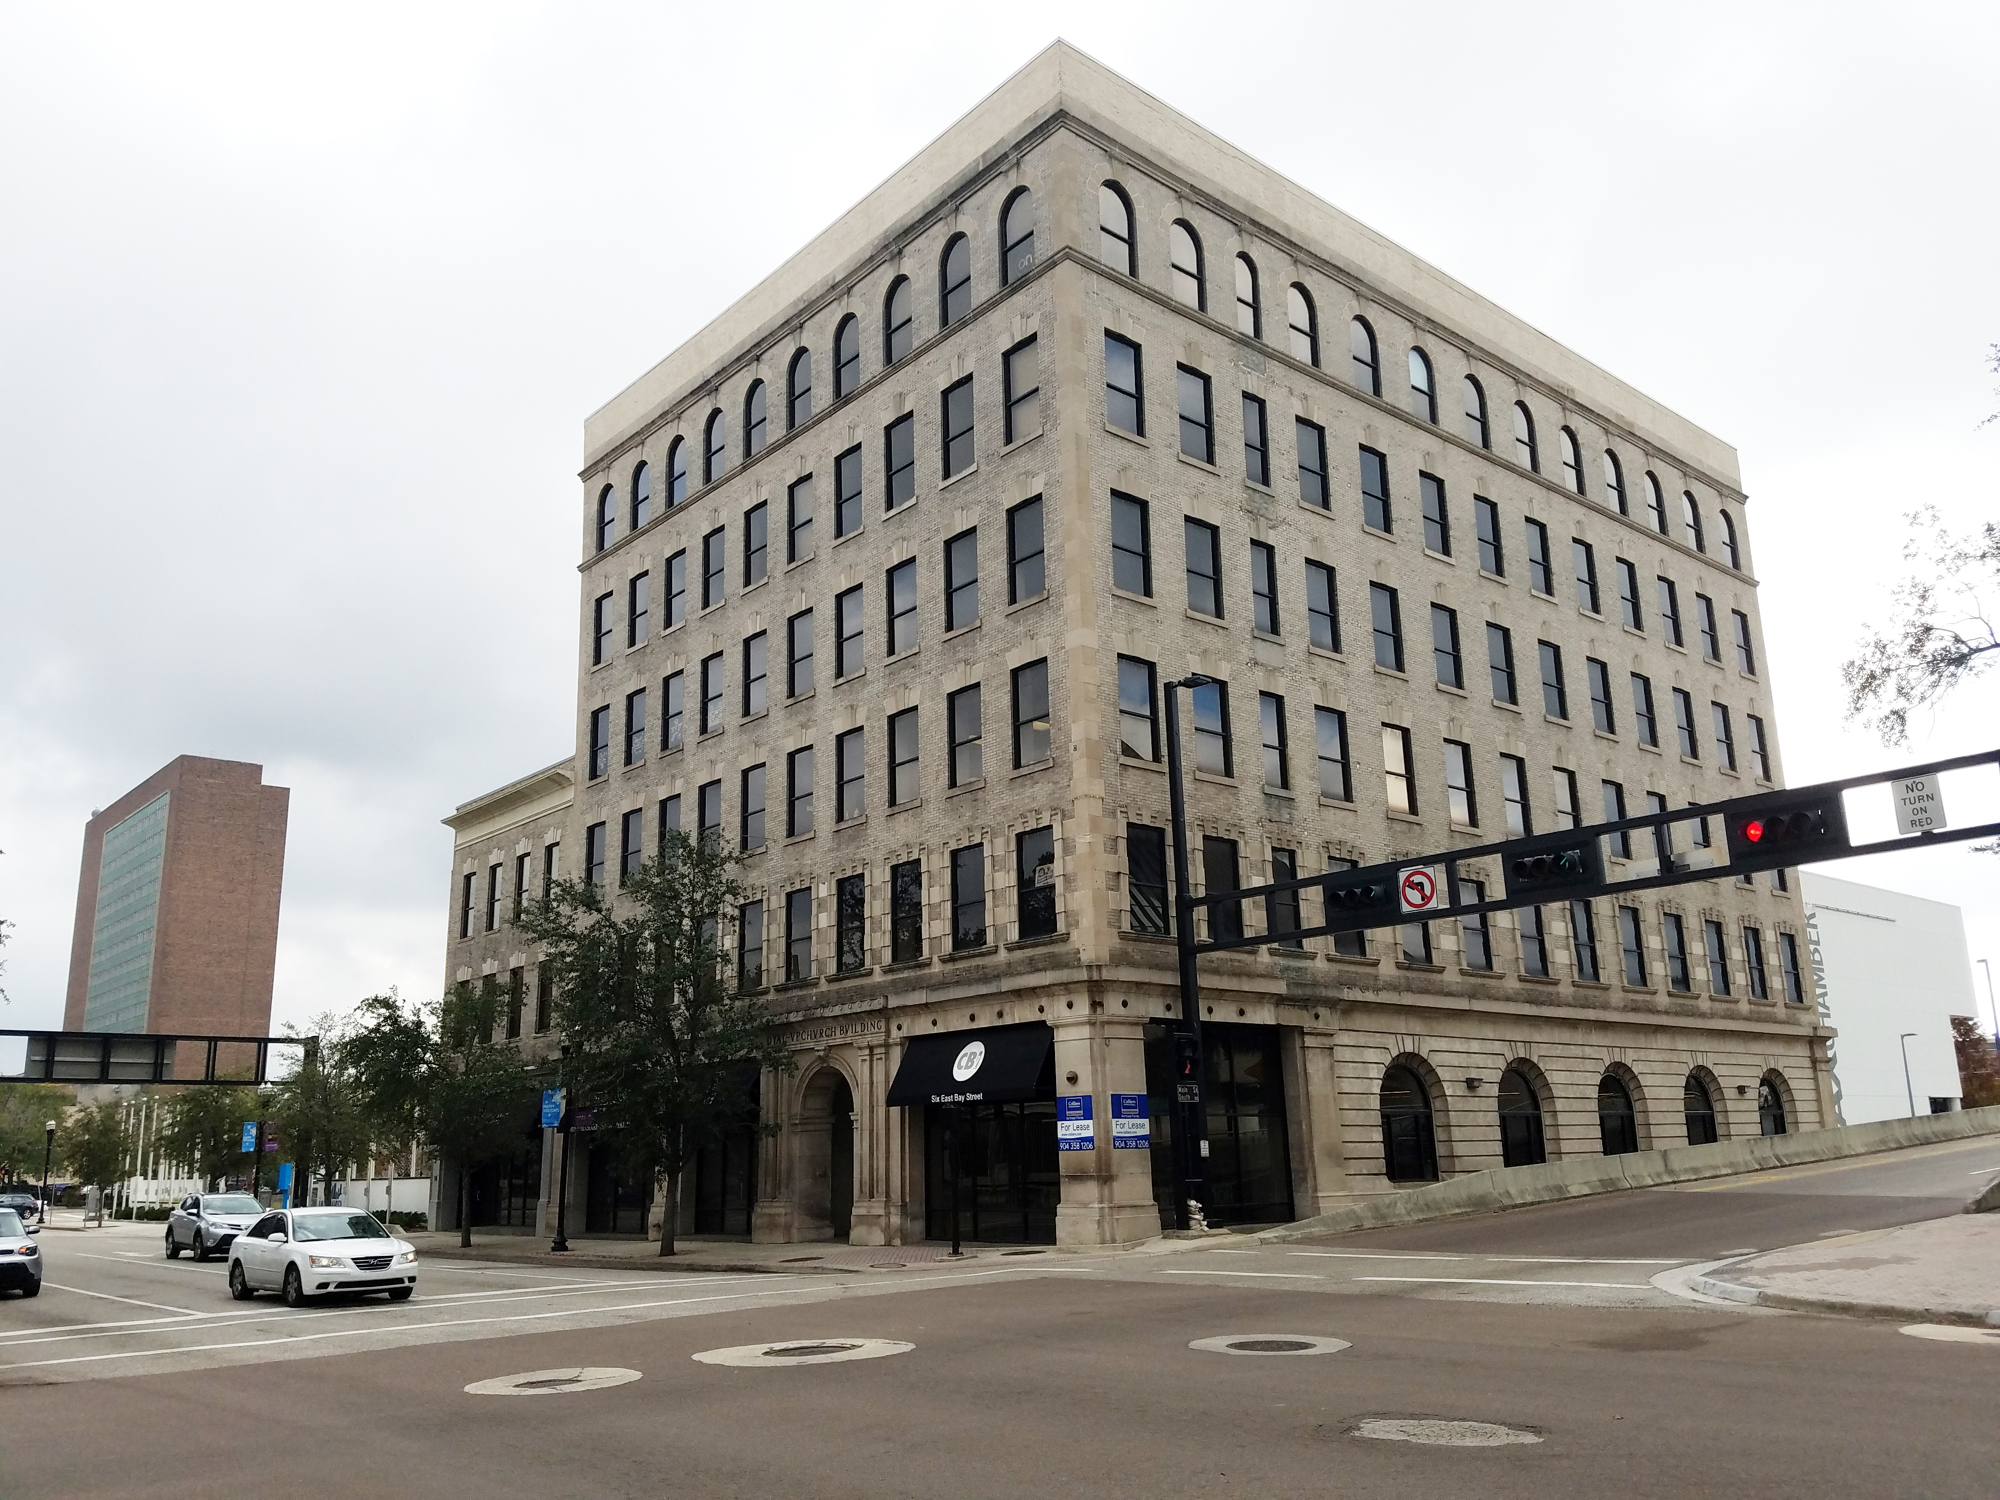 The SharedLabs Inc. headquarters is in the Dyal-Upchurch Building at 6 E. Bay St. in Downtown Jacksonville